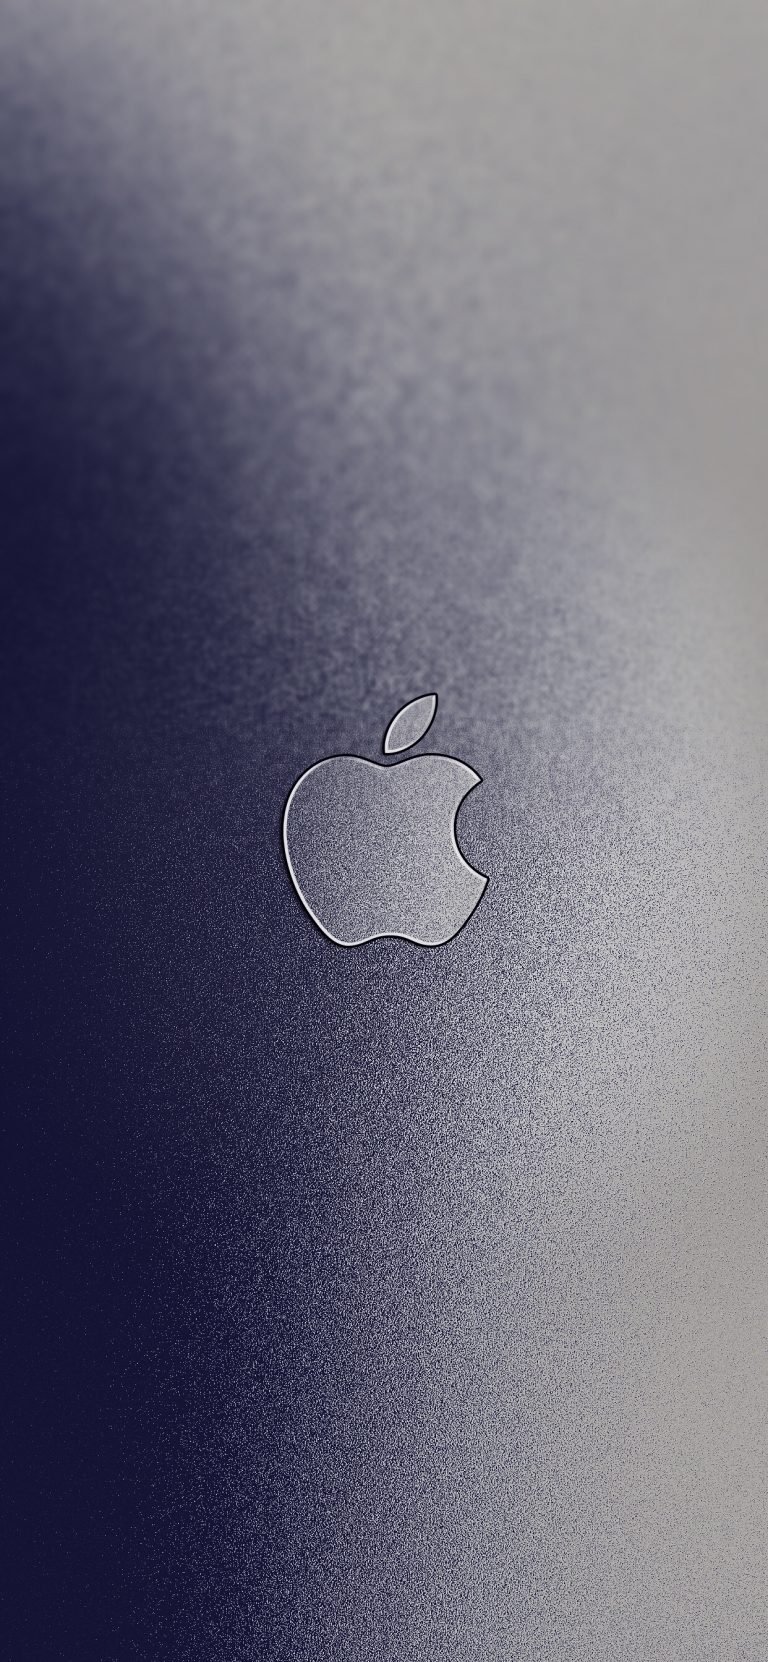 v6-with-Apple-Logo-iPhone-XS-Max-wallpaper-ar72014-768×1662